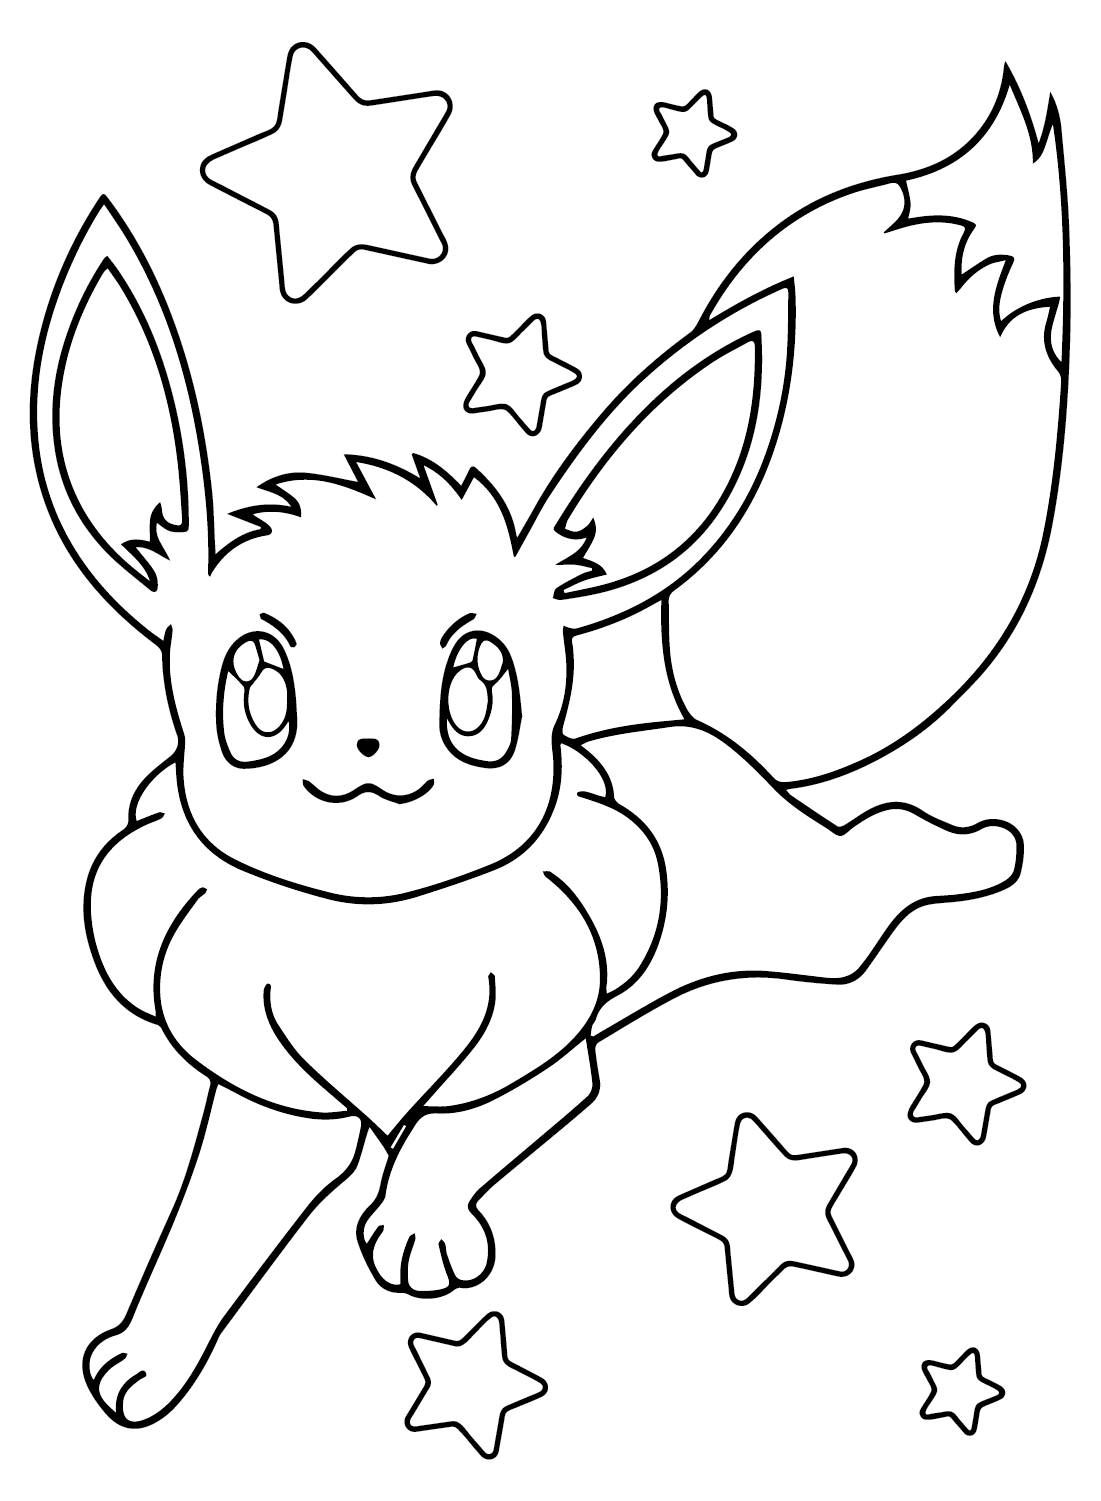 200 Eevee Coloring Pages: Evolve Your Art Skills 84